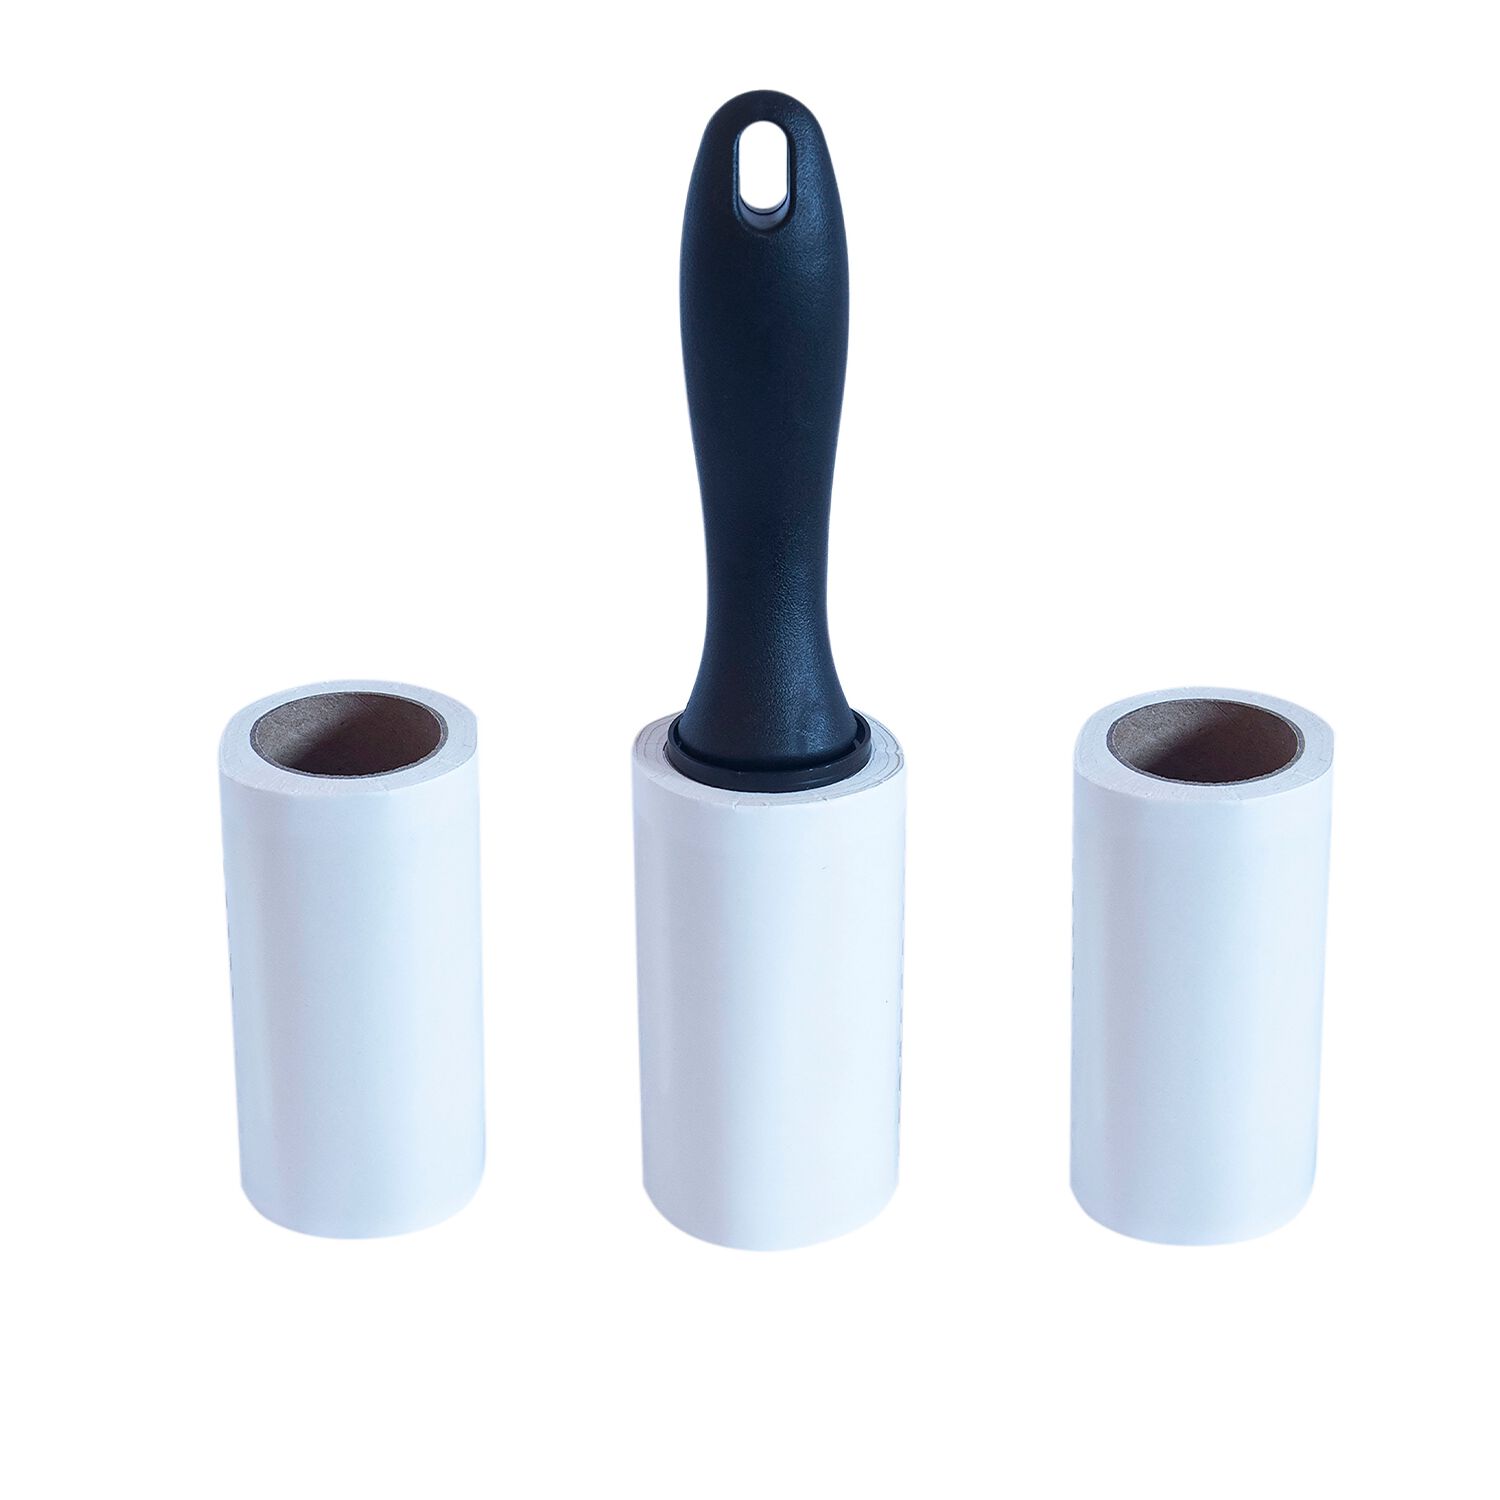 Sophisticlean Lint Roller with 2 Refills